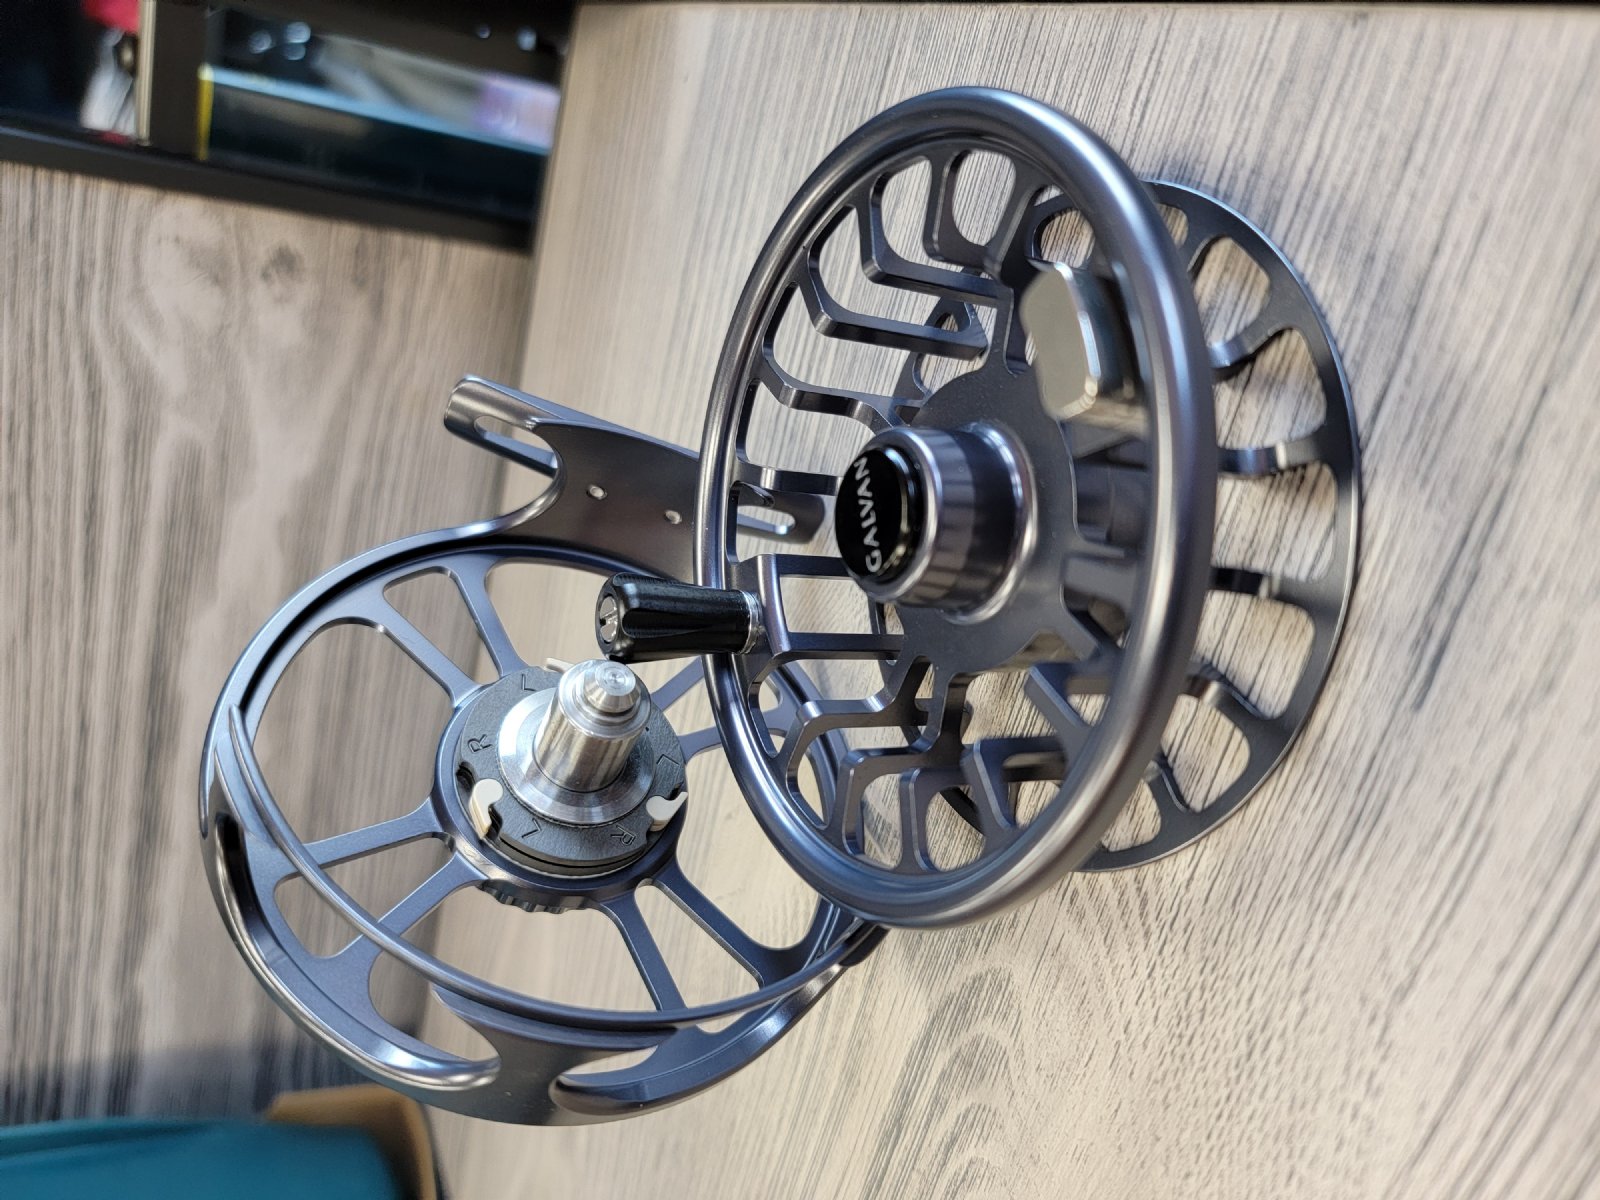 Galvan Euro Nymph Fly Reel - Fly Line Included